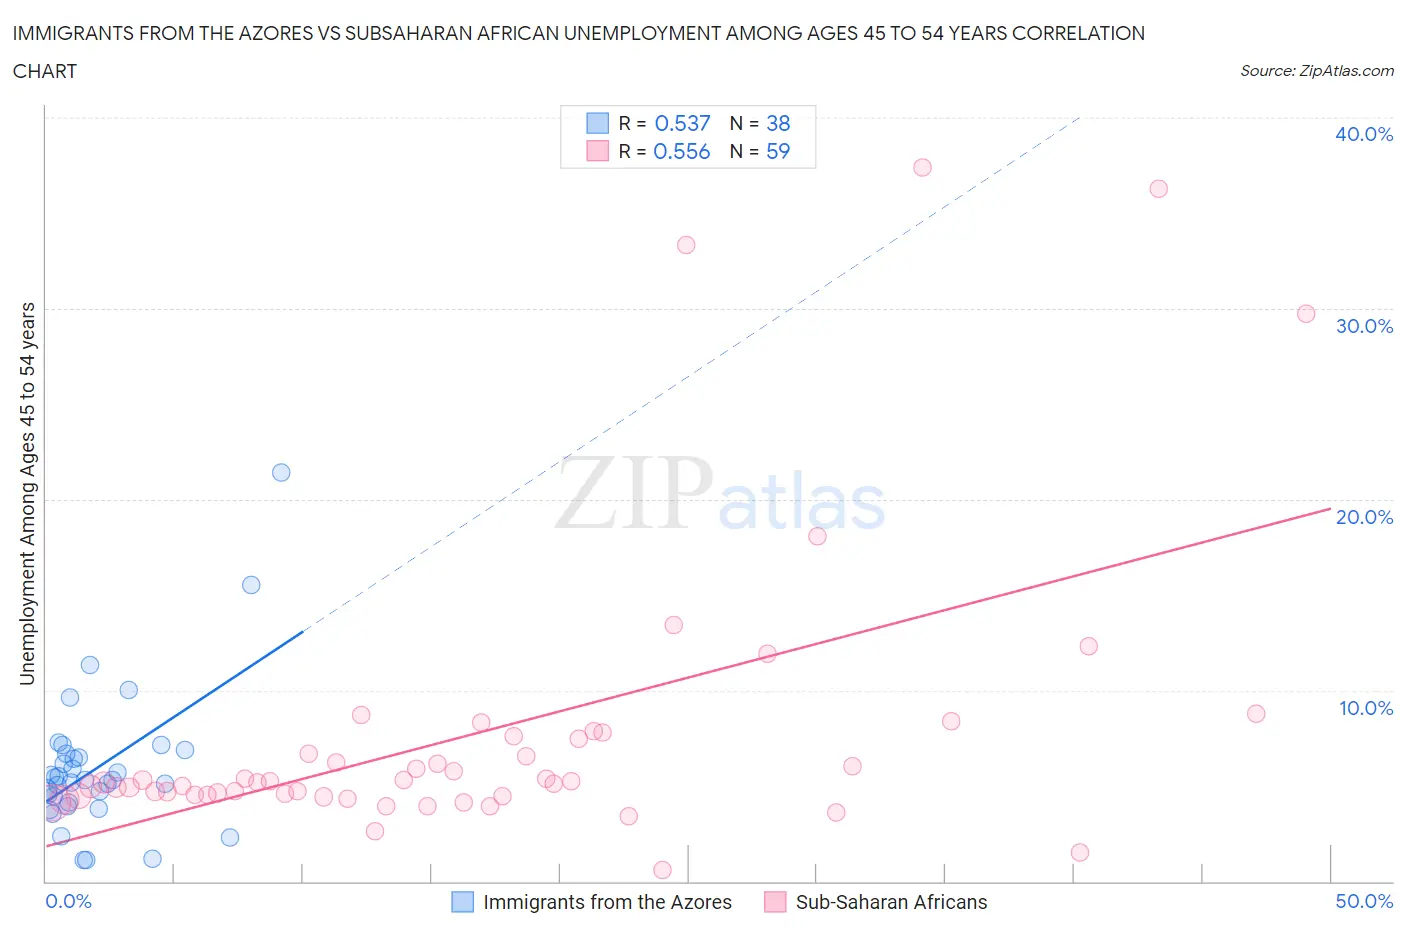 Immigrants from the Azores vs Subsaharan African Unemployment Among Ages 45 to 54 years